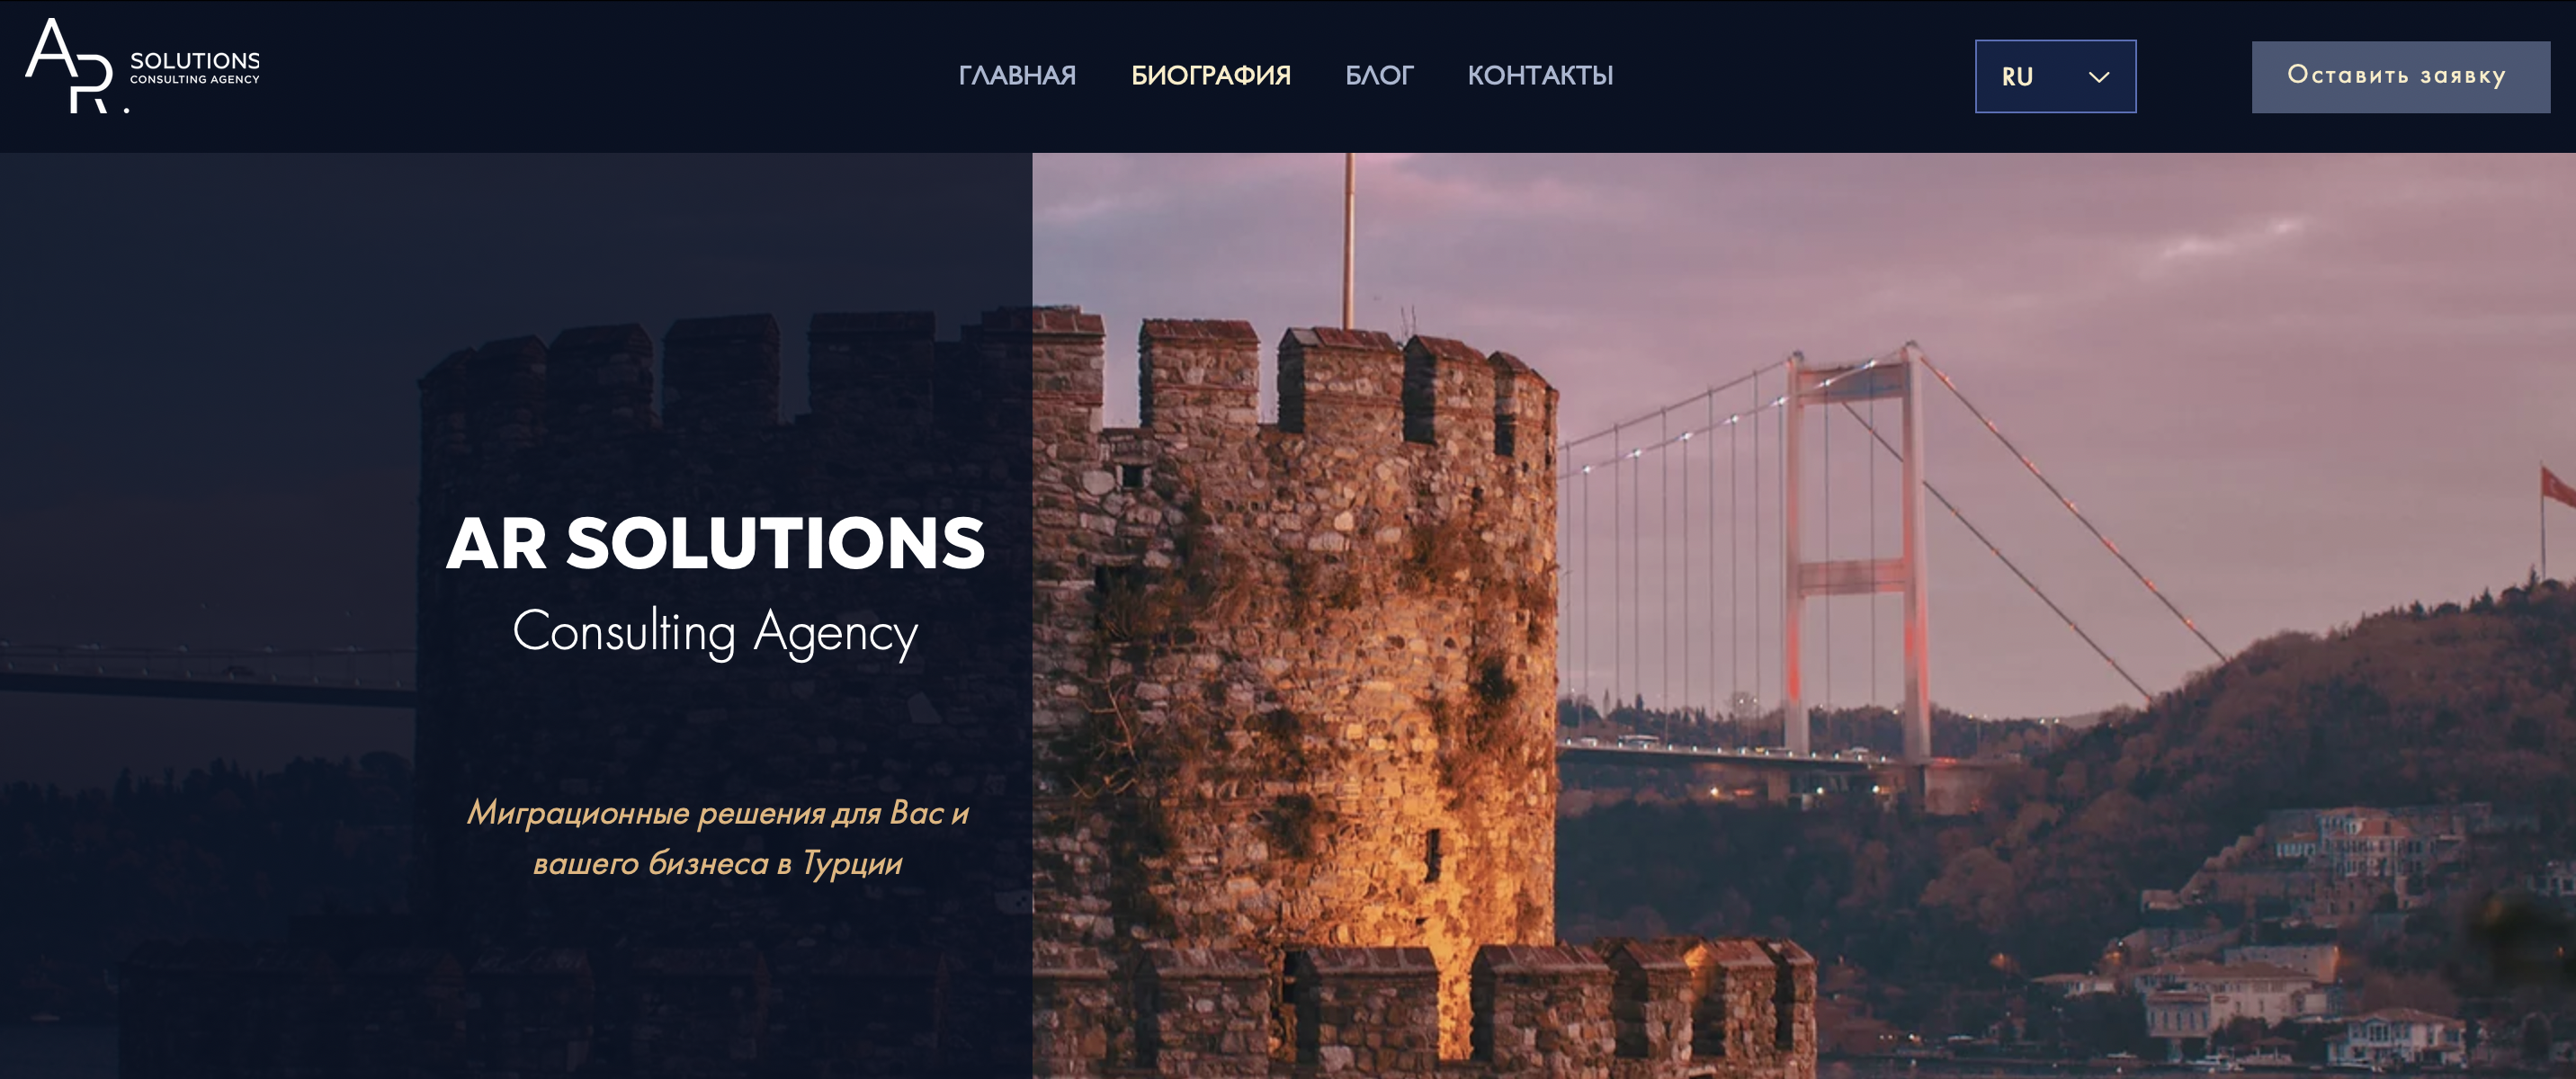 AR SOLUTIONS Consulting Agency